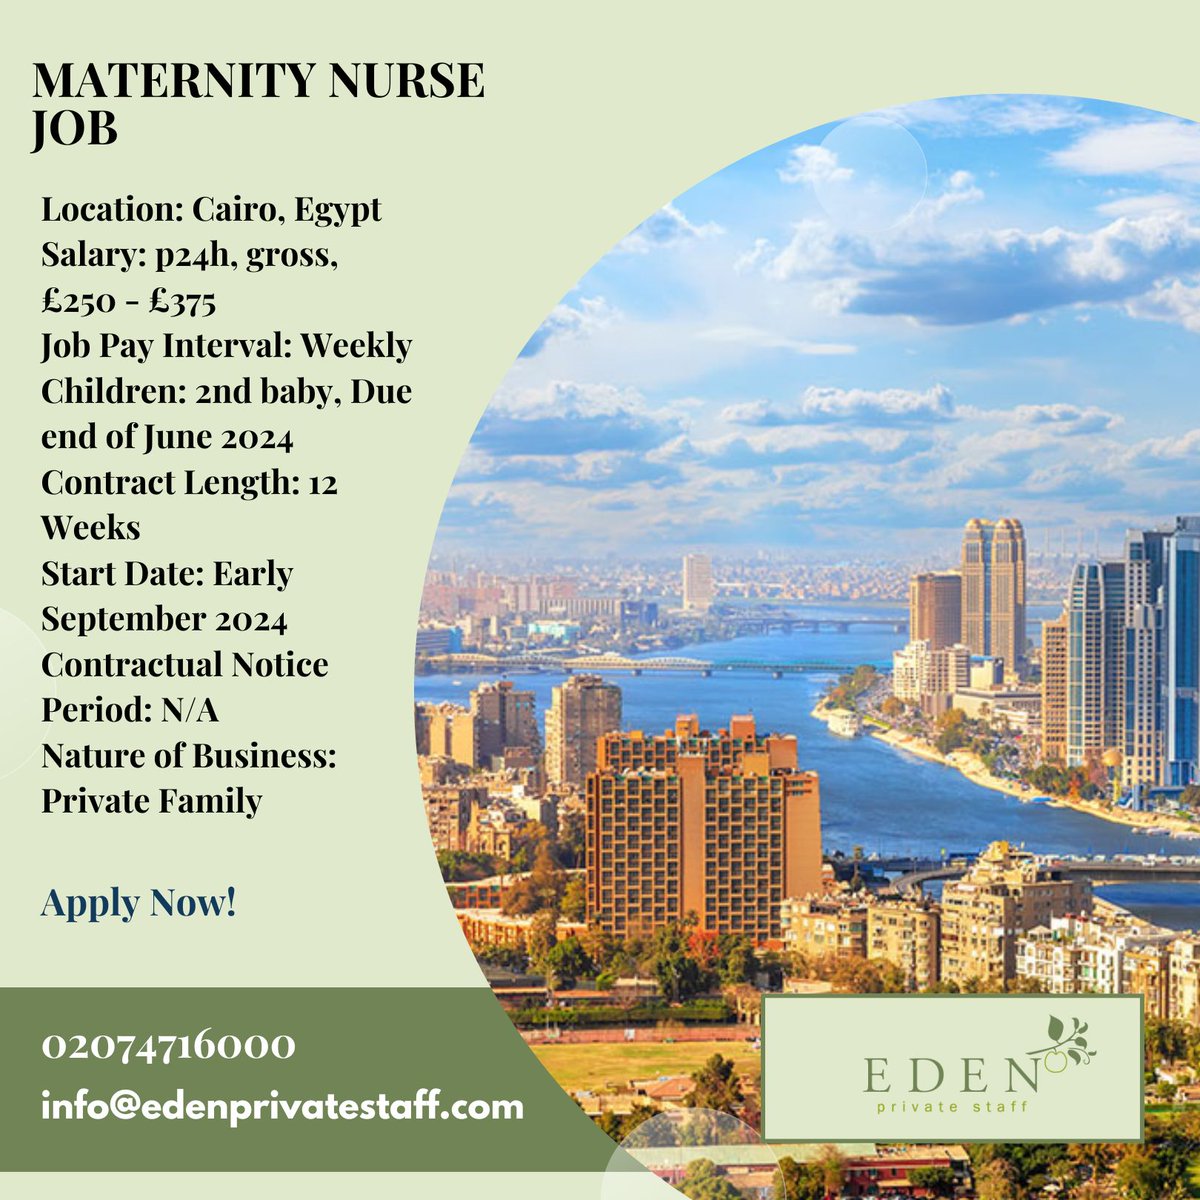 Maternity Nurse Job - Lovely overseas client returning to Eden to help find an experienced maternity nurse with good energy for their second baby, to start in Early September. edenprivatestaff.com/job/overseas-m… #MaternityAgency #maternityleave #maternitynurse #maternityjobs #midwifejobs